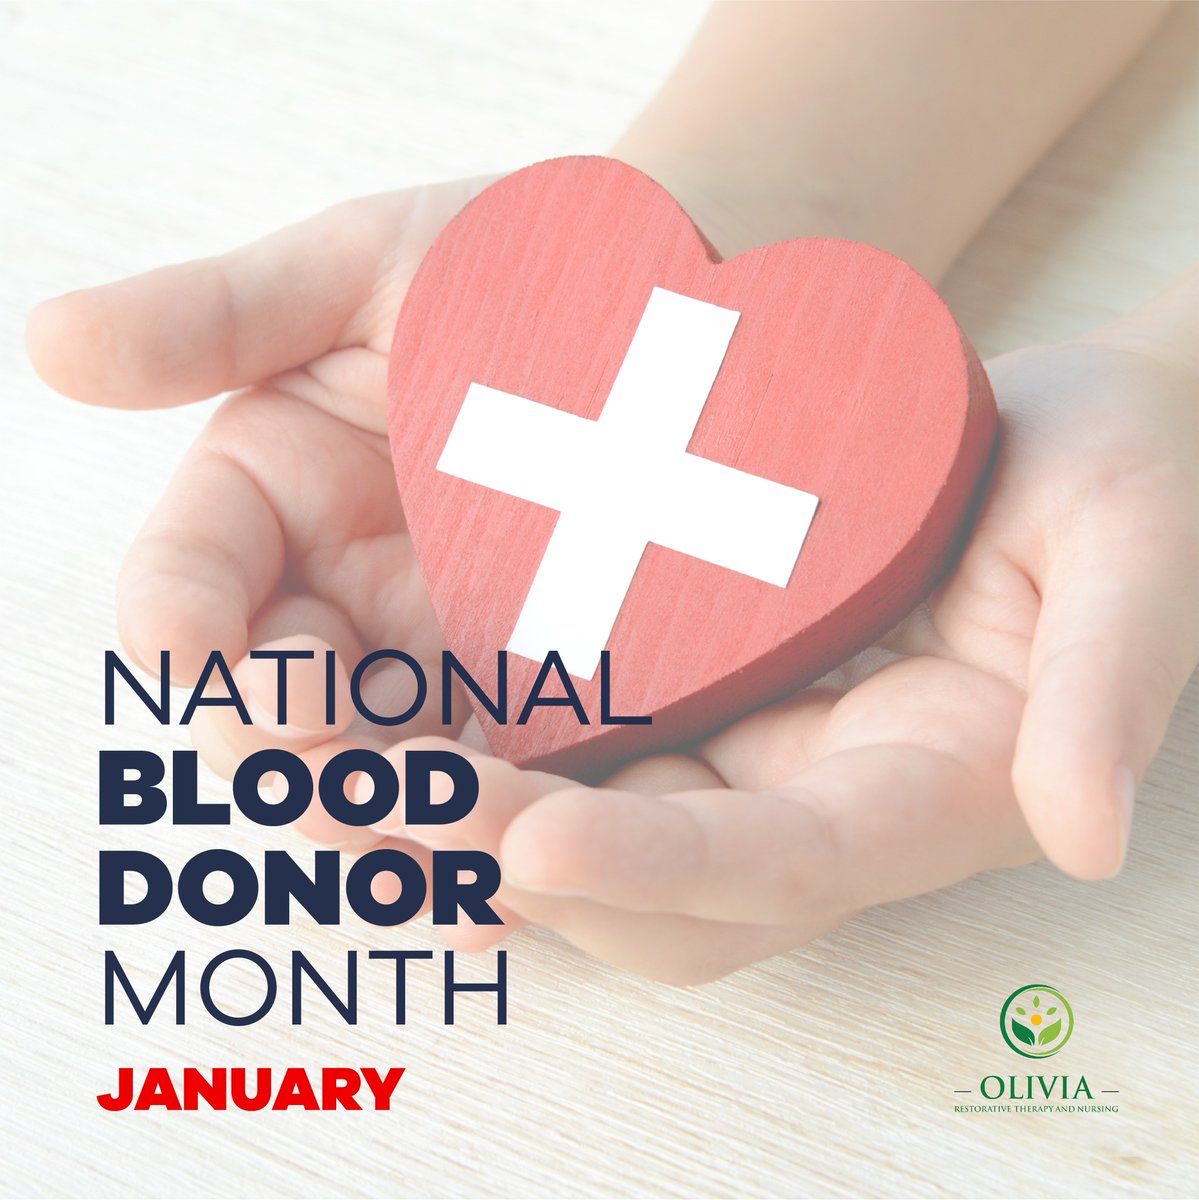 January is National Blood Donor Month. This is a special time to honor the blood donors who make it possible for hospitals and medical facilities to provide life-saving blood products to patients in need. Every blood donation matters.

#NationalBloodDonorMonth #HelpSaveLives